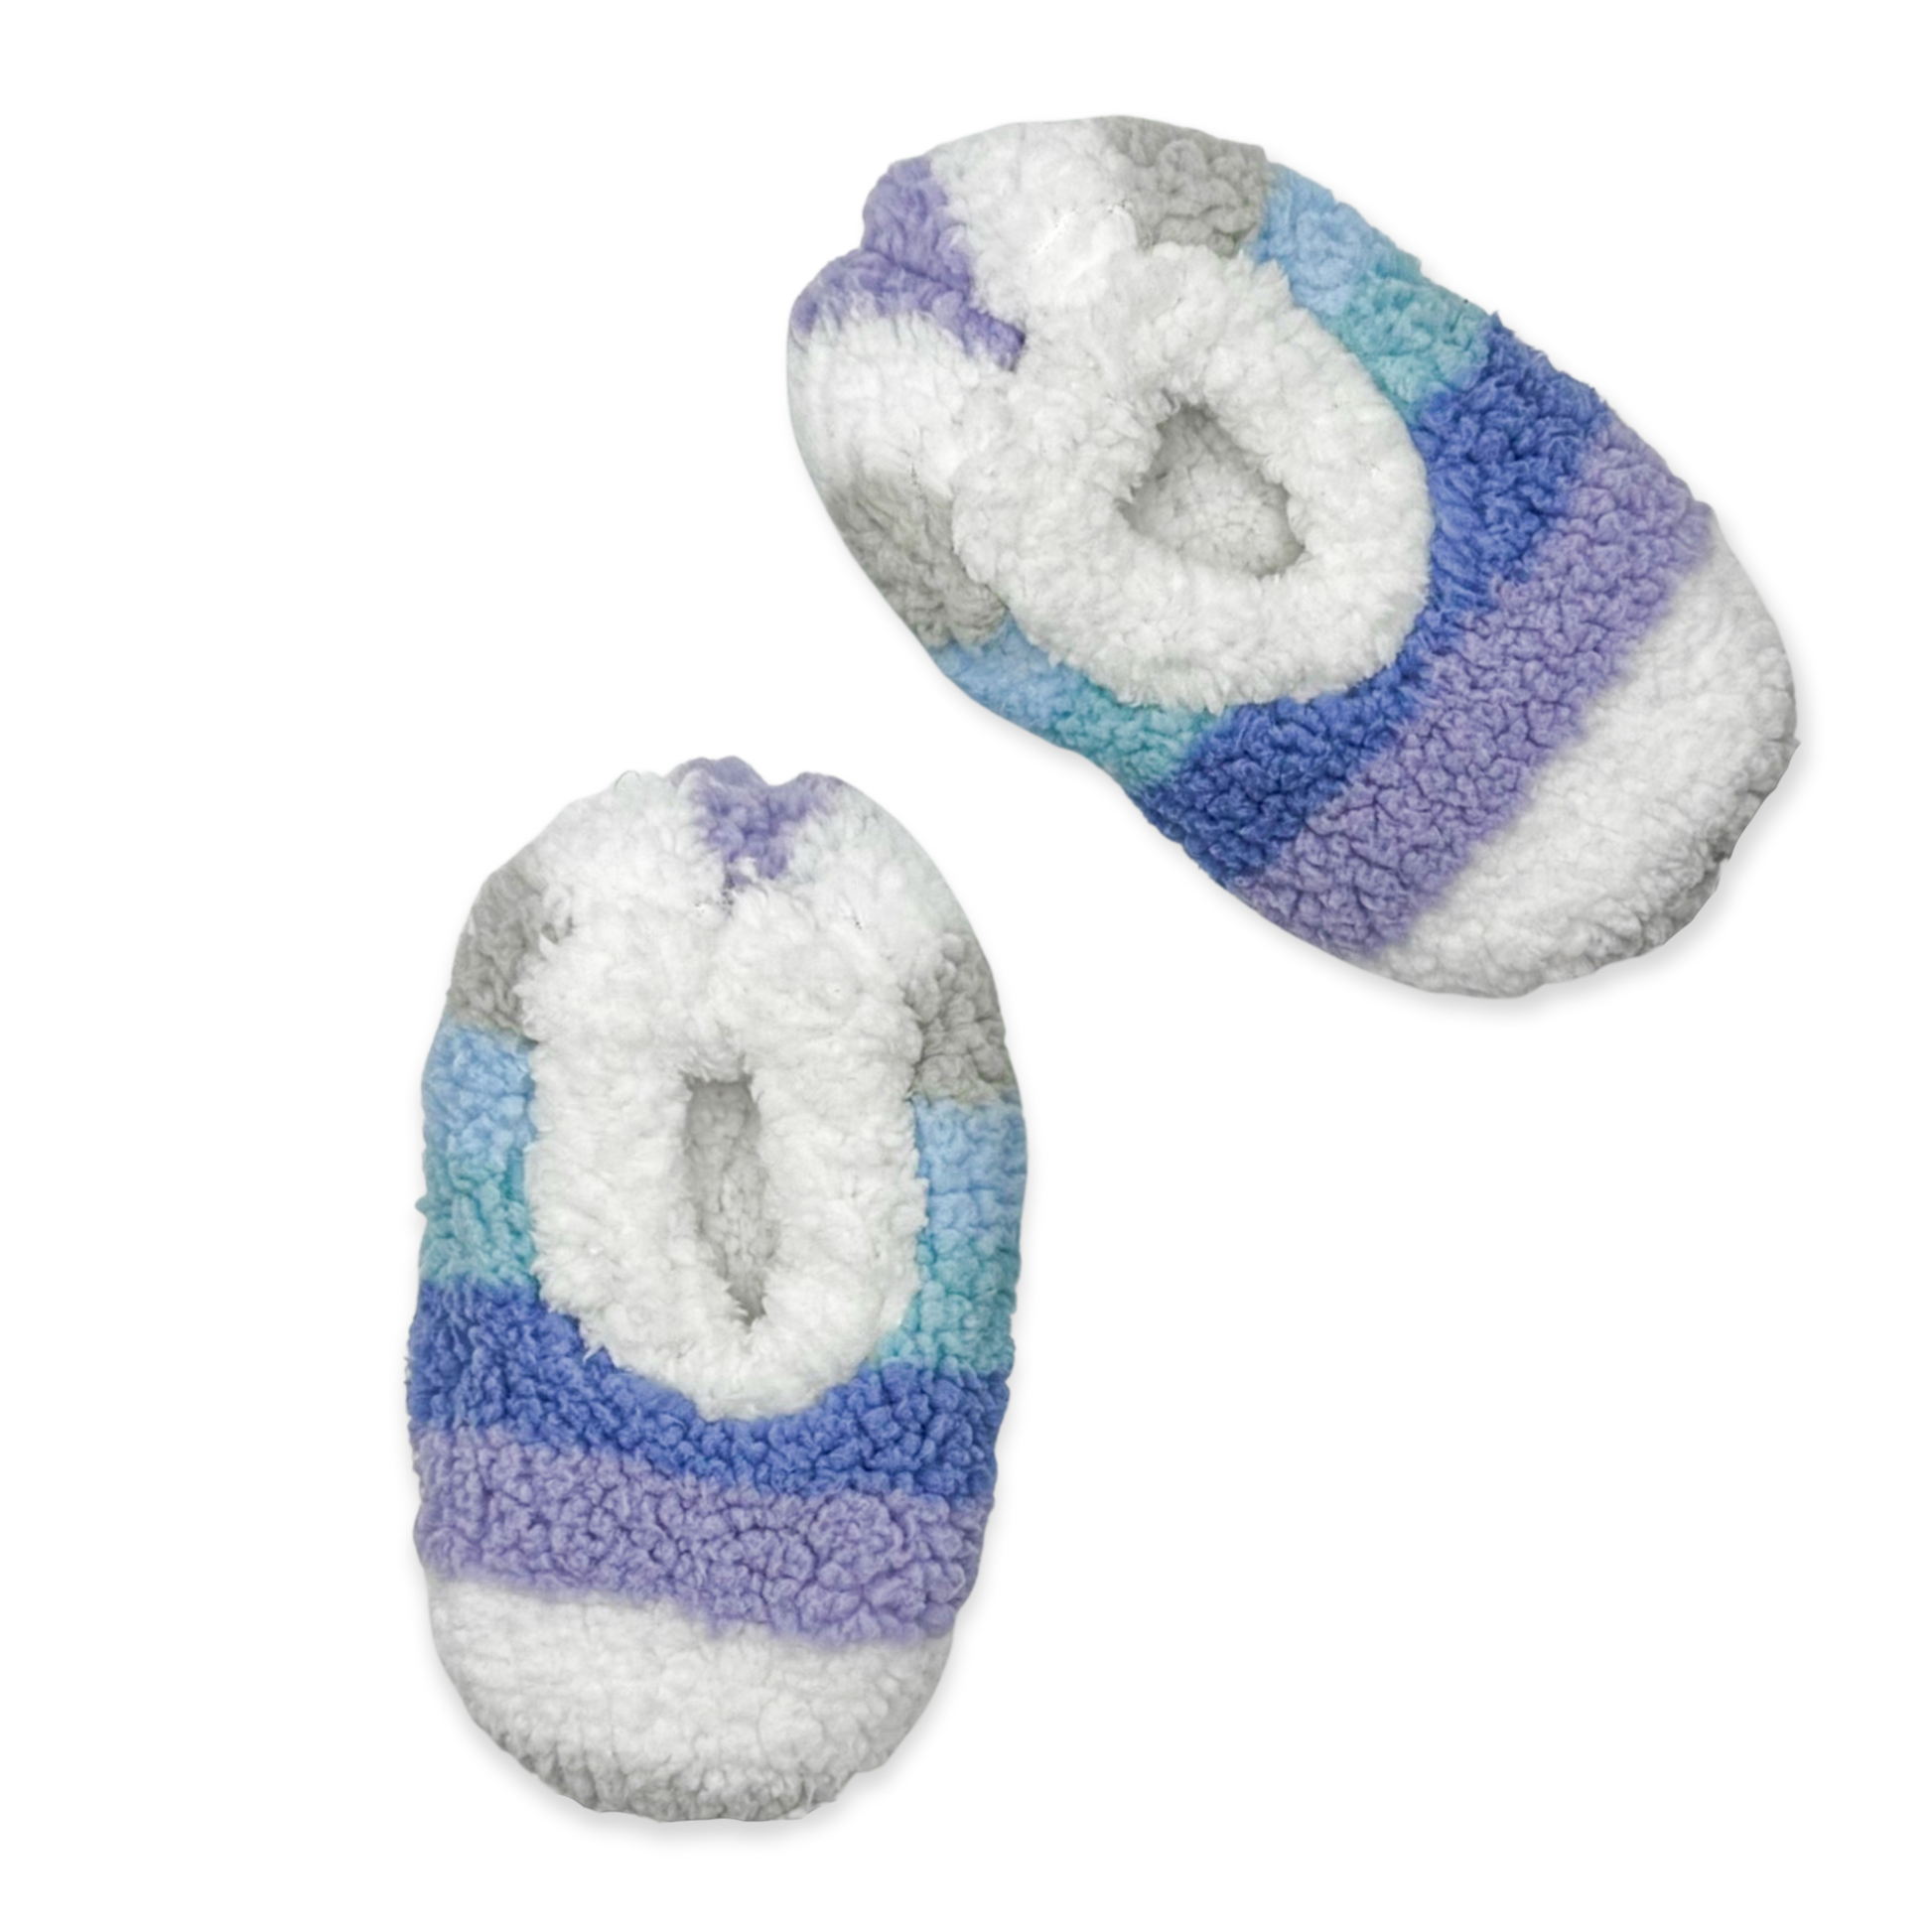 The image depicts a pair of galaxy ombre striped slippers. The slippers are made of a soft, fuzzy material and have a closed toe design. They are perfect for keeping your feet warm and cozy on cold days.